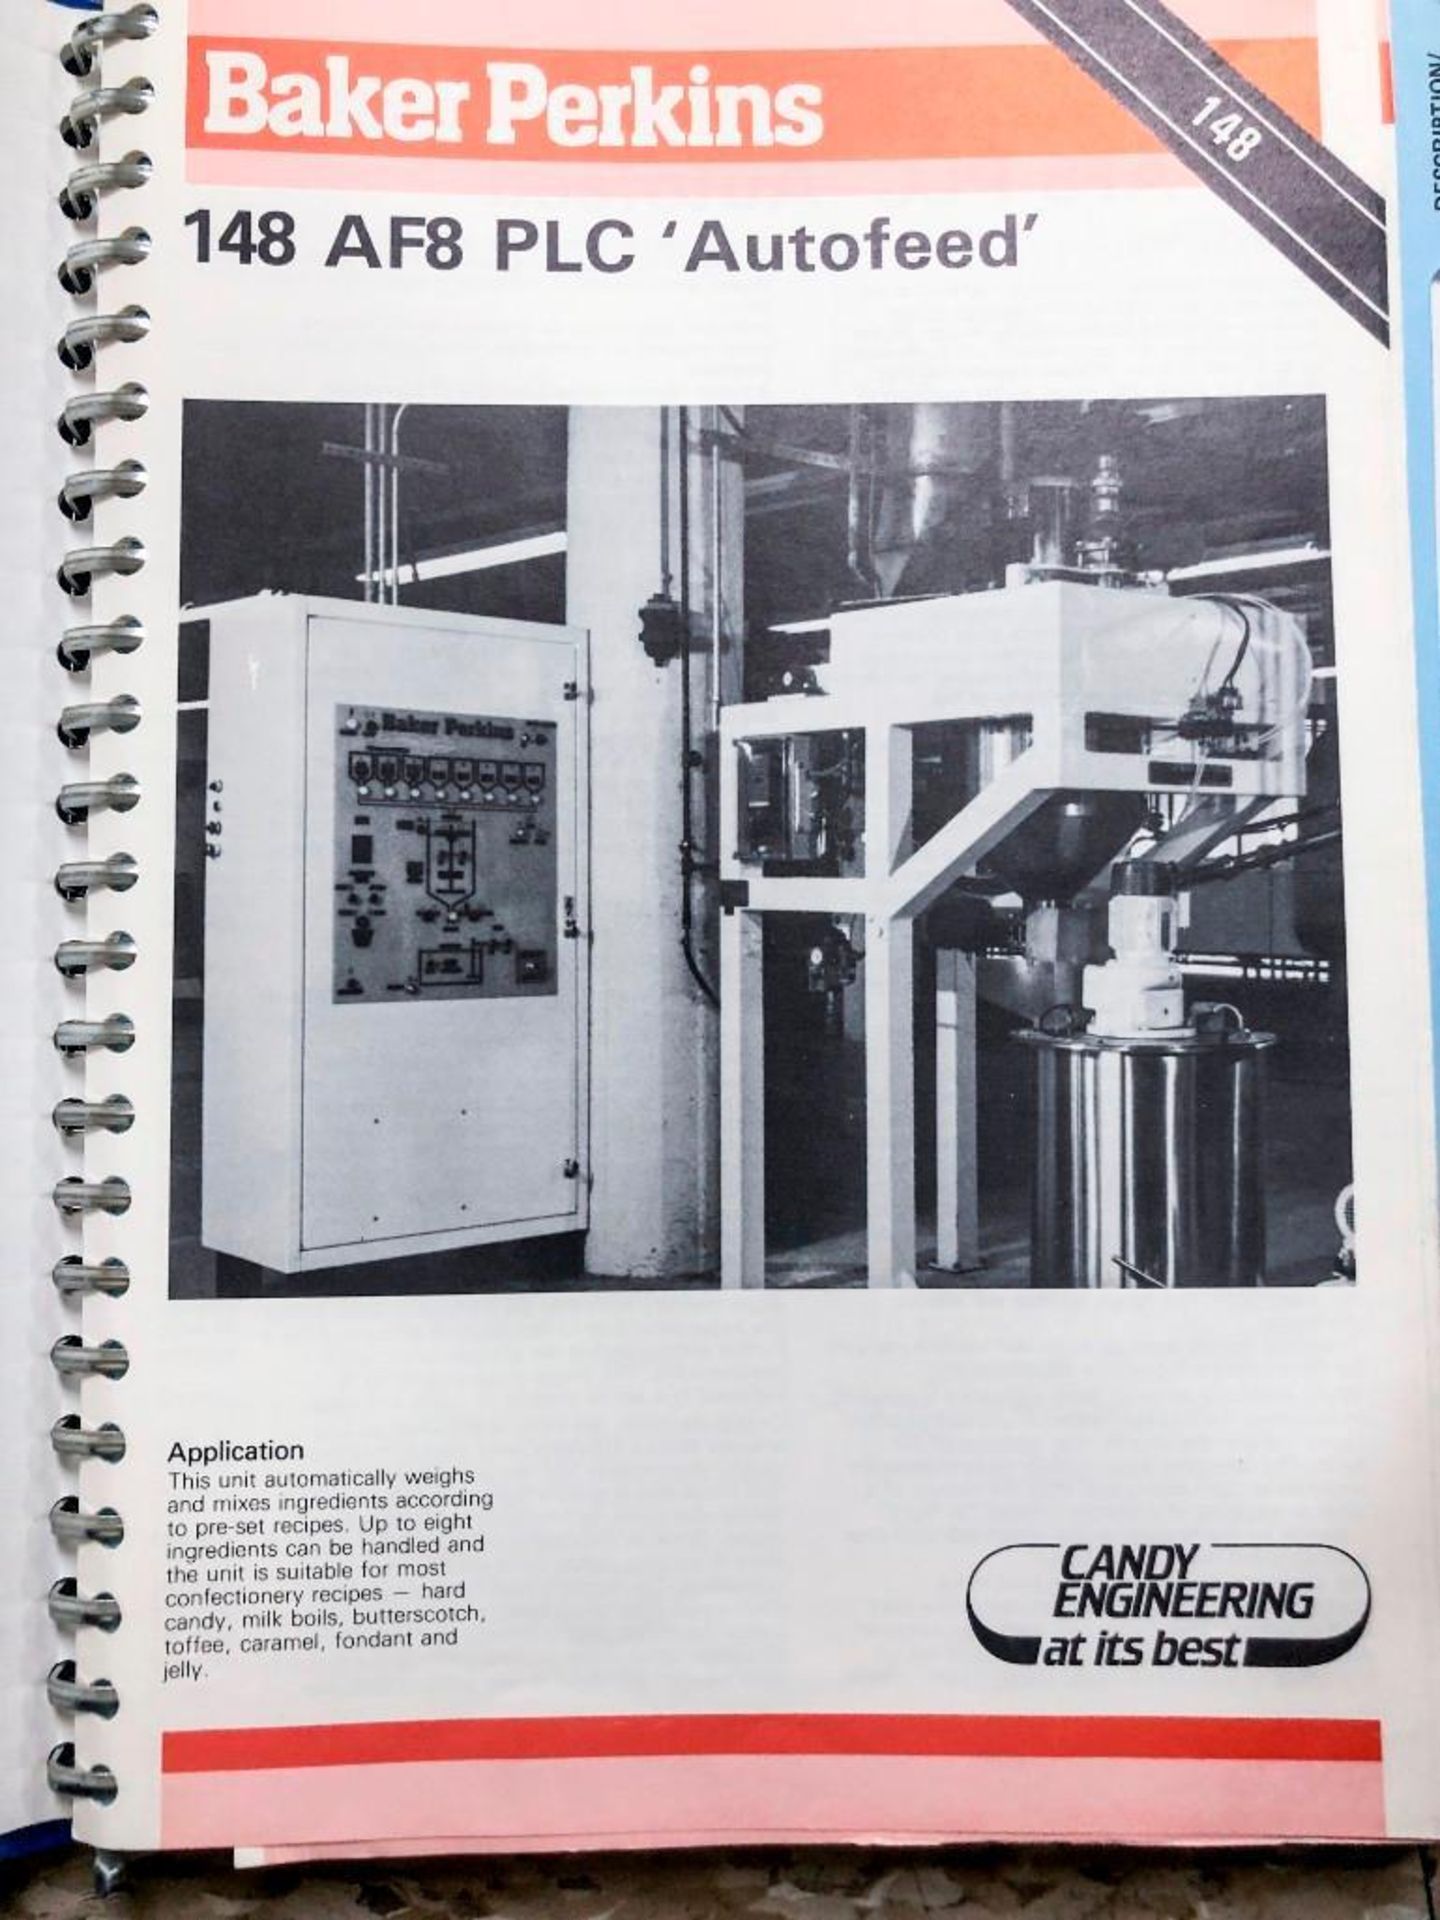 Baker Perkins PLC Autofeed Cooker - Image 12 of 23